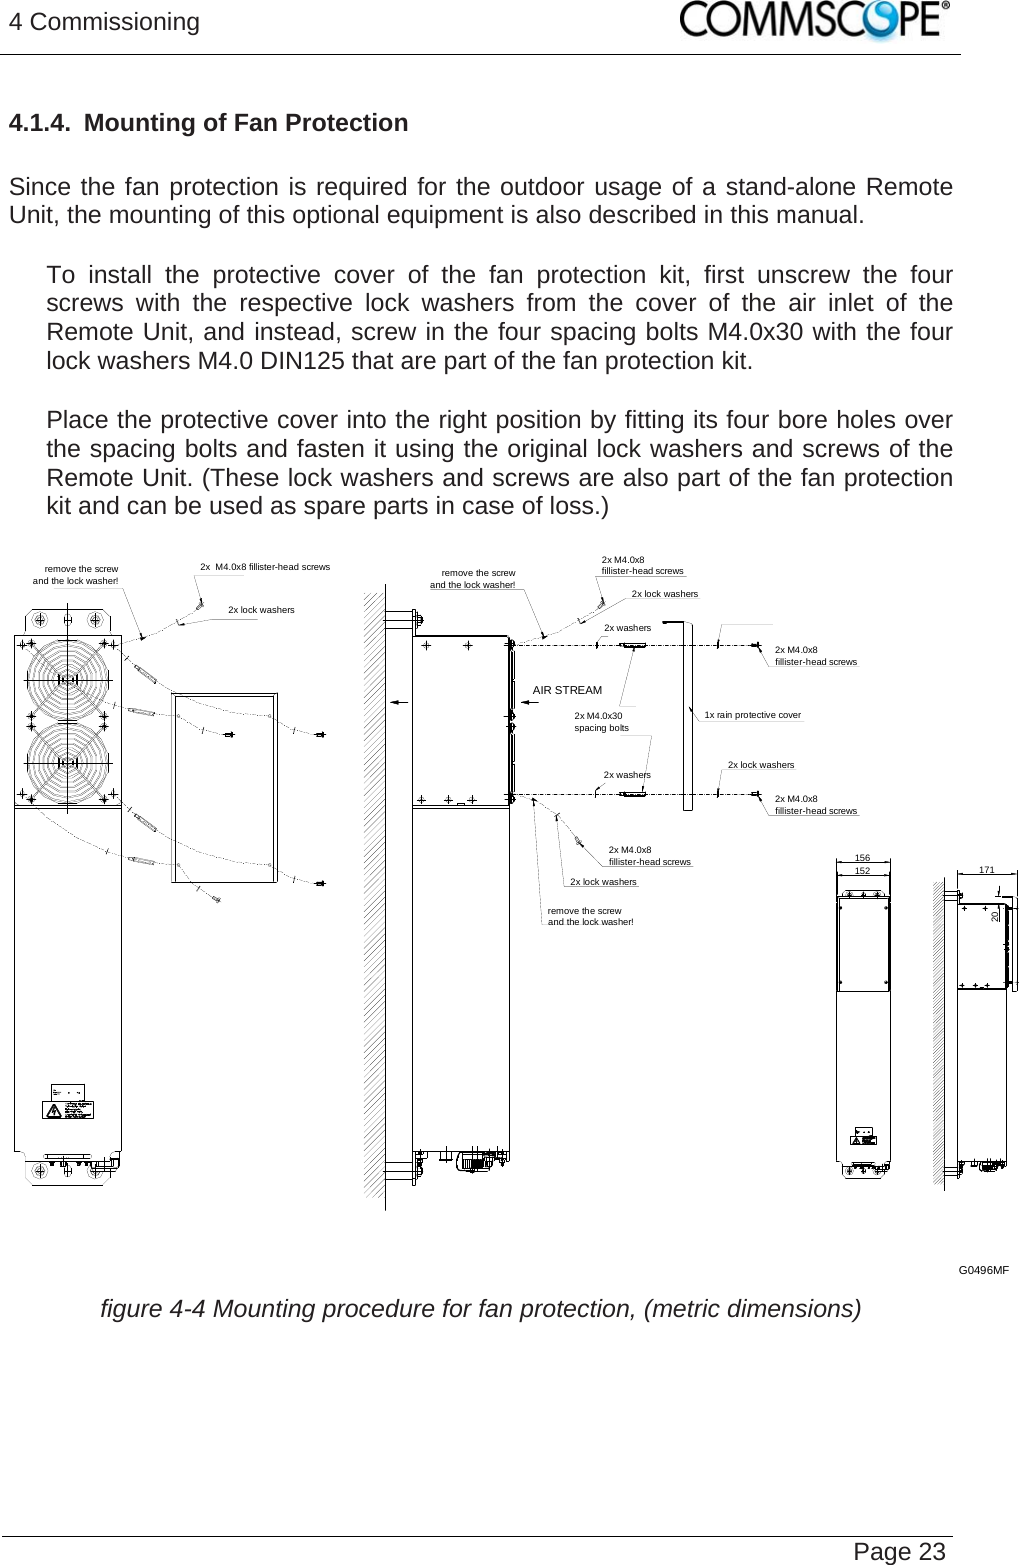 4 Commissioning   Page 234.1.4.  Mounting of Fan Protection  Since the fan protection is required for the outdoor usage of a stand-alone Remote Unit, the mounting of this optional equipment is also described in this manual.     To install the protective cover of the fan protection kit, first unscrew the four screws with the respective lock washers from the cover of the air inlet of the Remote Unit, and instead, screw in the four spacing bolts M4.0x30 with the four lock washers M4.0 DIN125 that are part of the fan protection kit.     Place the protective cover into the right position by fitting its four bore holes over the spacing bolts and fasten it using the original lock washers and screws of the Remote Unit. (These lock washers and screws are also part of the fan protection kit and can be used as spare parts in case of loss.)  2x M4.0x8fillister-head screws2x lock washersremove the screwand the lock washer!2x lock washers2x M4.0x8fillister-head screwsremove the screwand the lock washer!2x M4.0x8fillister-head screws1x rain protective cover2x lock washers2x M4.0x8fillister-head screws2x  M4.0x8 fillister-head screws2x lock washersremove the screwand the lock washer!2x washers2x washers156152 17120AIR STREAM2x M4.0x30spacing boltsG0496MF  figure 4-4 Mounting procedure for fan protection, (metric dimensions)    